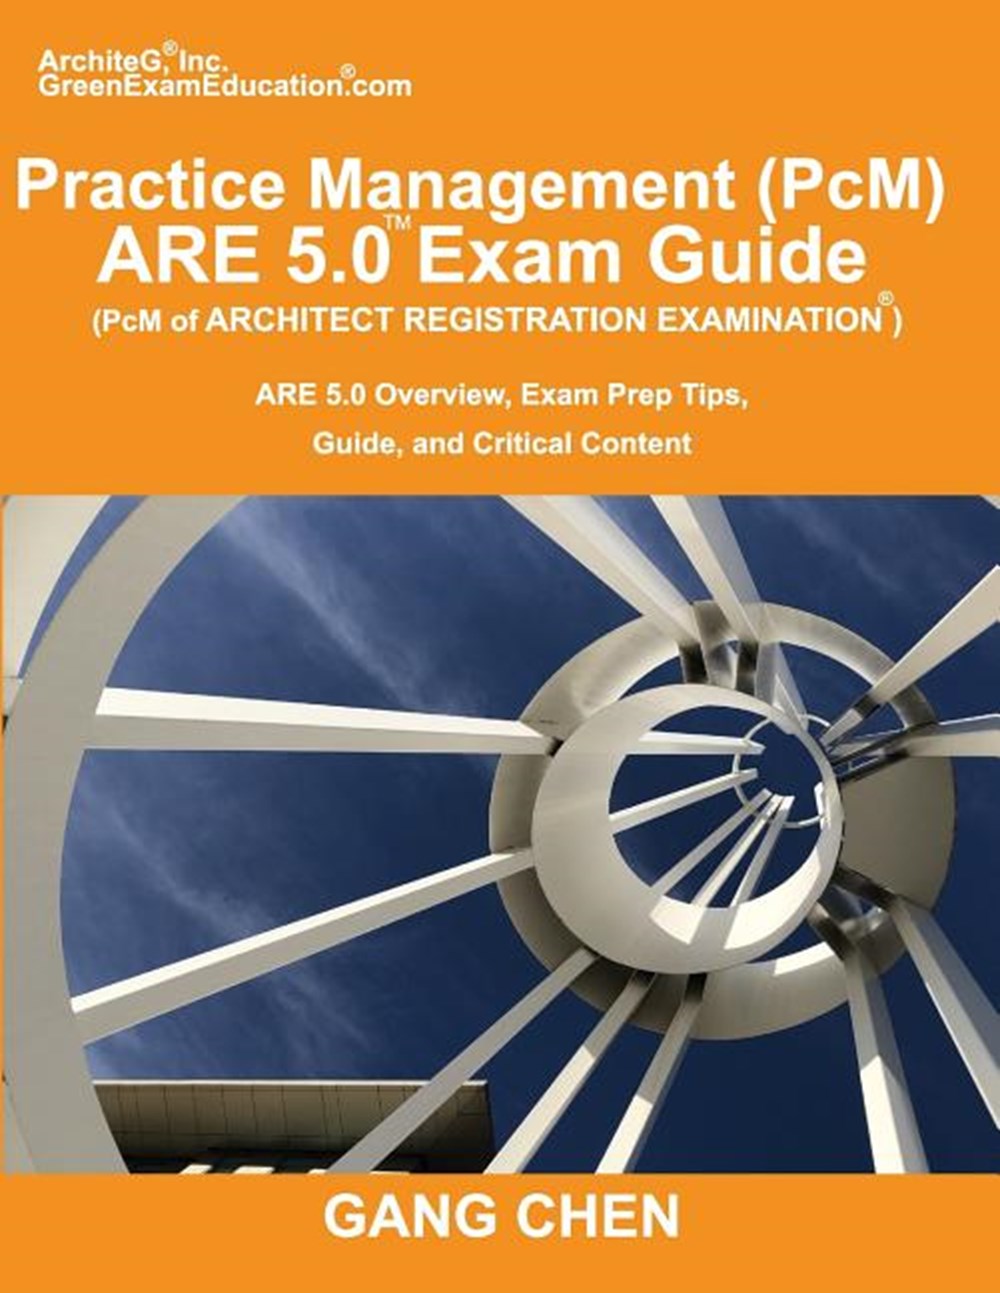 Practice Management (PcM) ARE 5.0 Exam Guide (Architect Registration Examination): ARE 5.0 Overview,